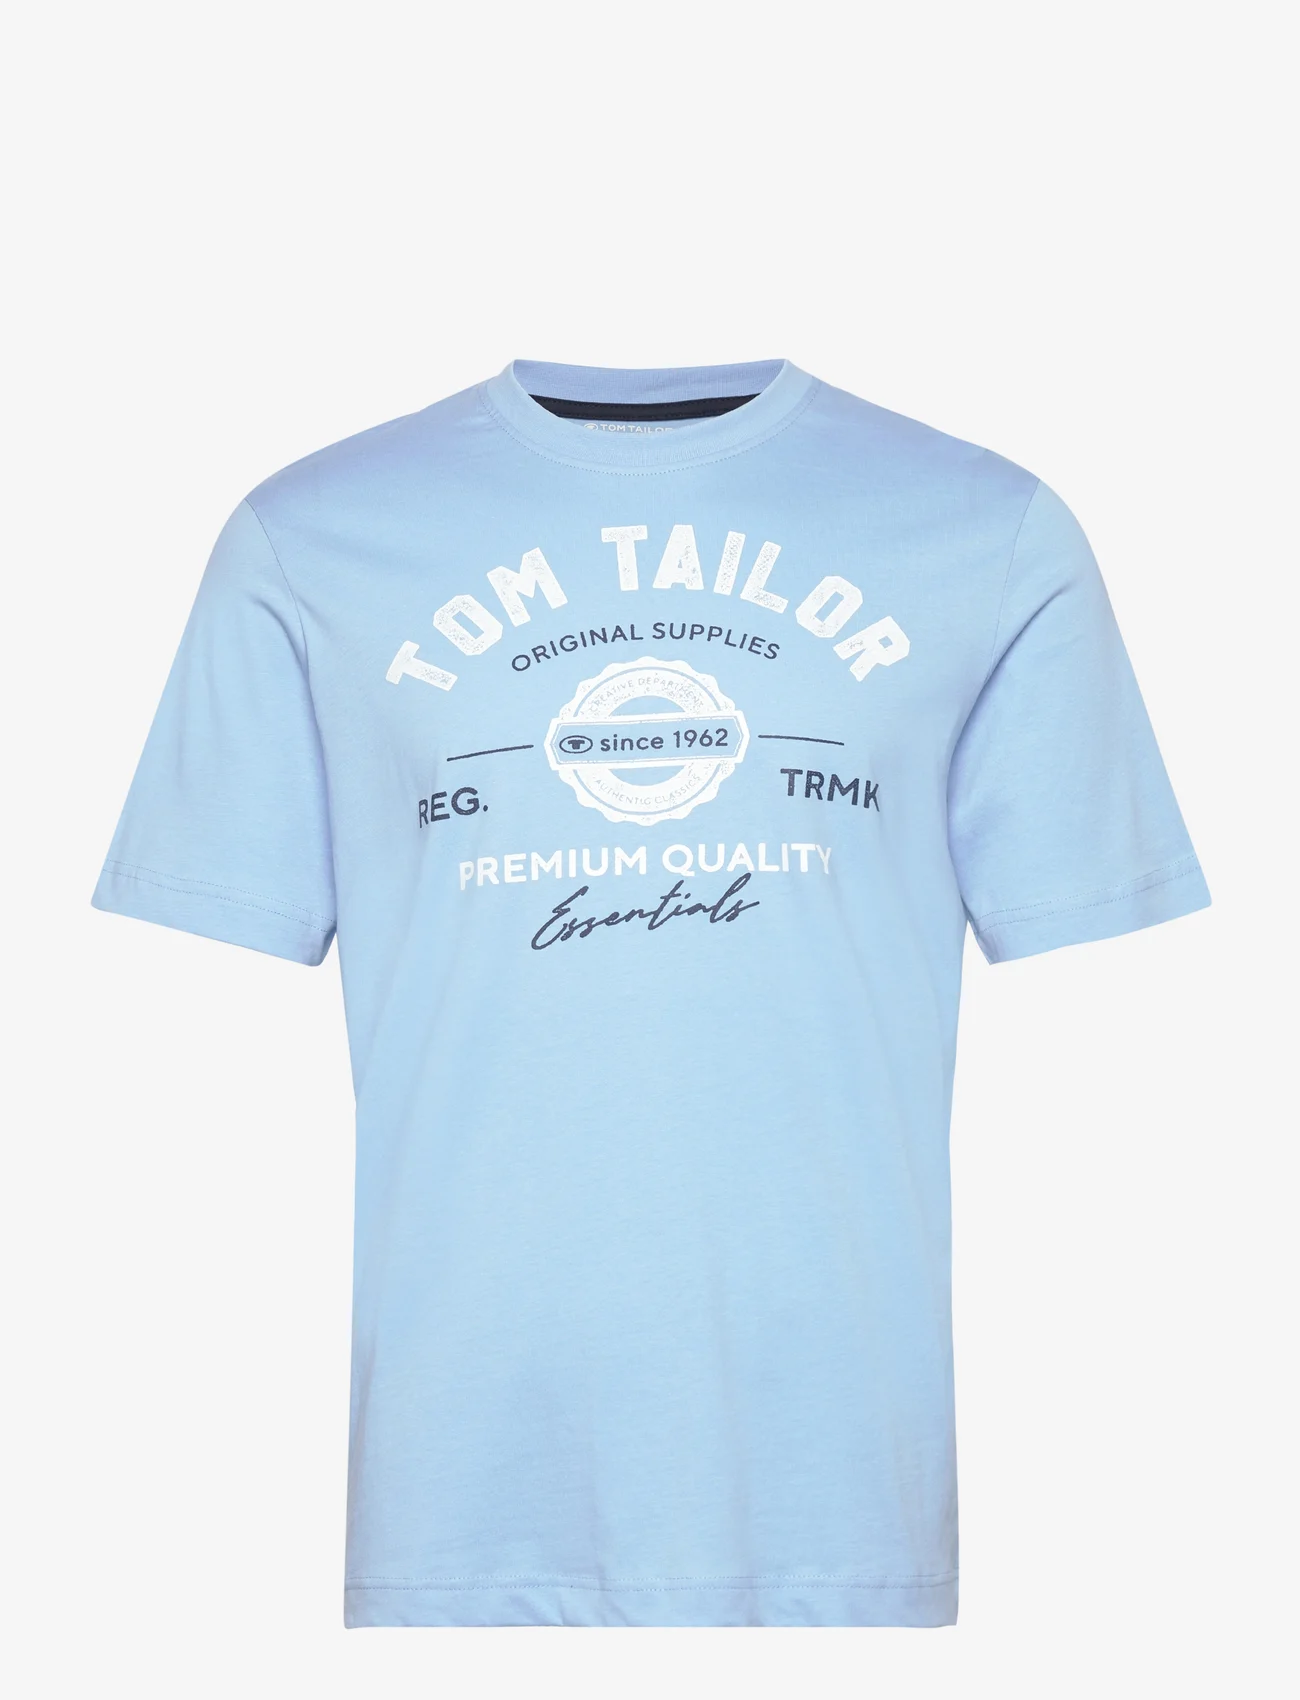 Tom Tailor - logo tee - die niedrigsten preise - washed out middle blue - 0